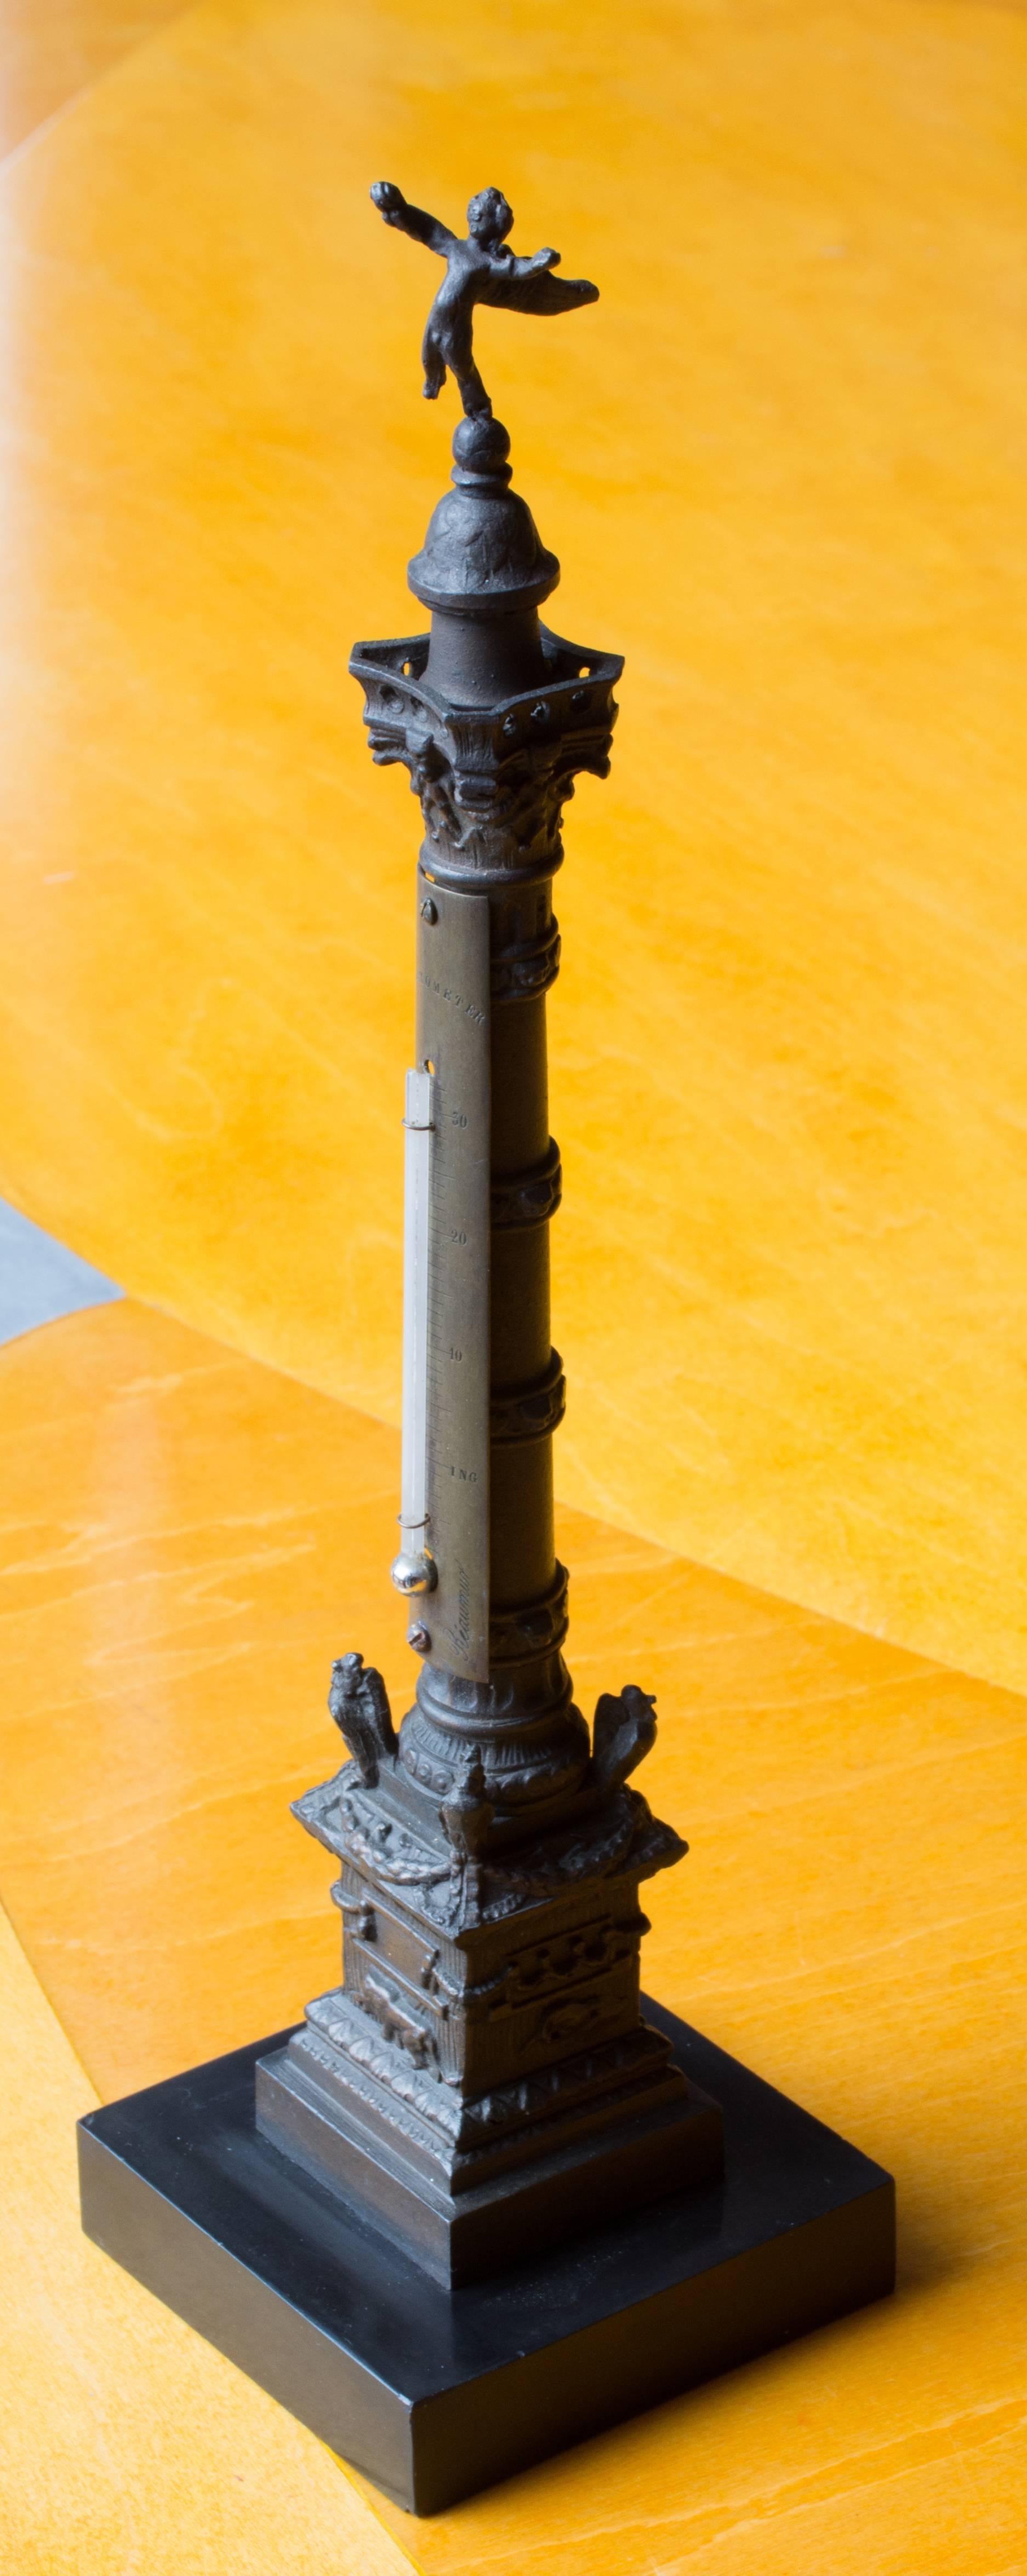 Colonne de Juillet, Paris
Cast bronze model, with stamped sheet brass and glass thermometer, on a polished French slate base
12” H, c 1870

Paris’ Colonne de Juillet (July Column), commemorating the Trois Glorieuses (three Gloroius Days) of the